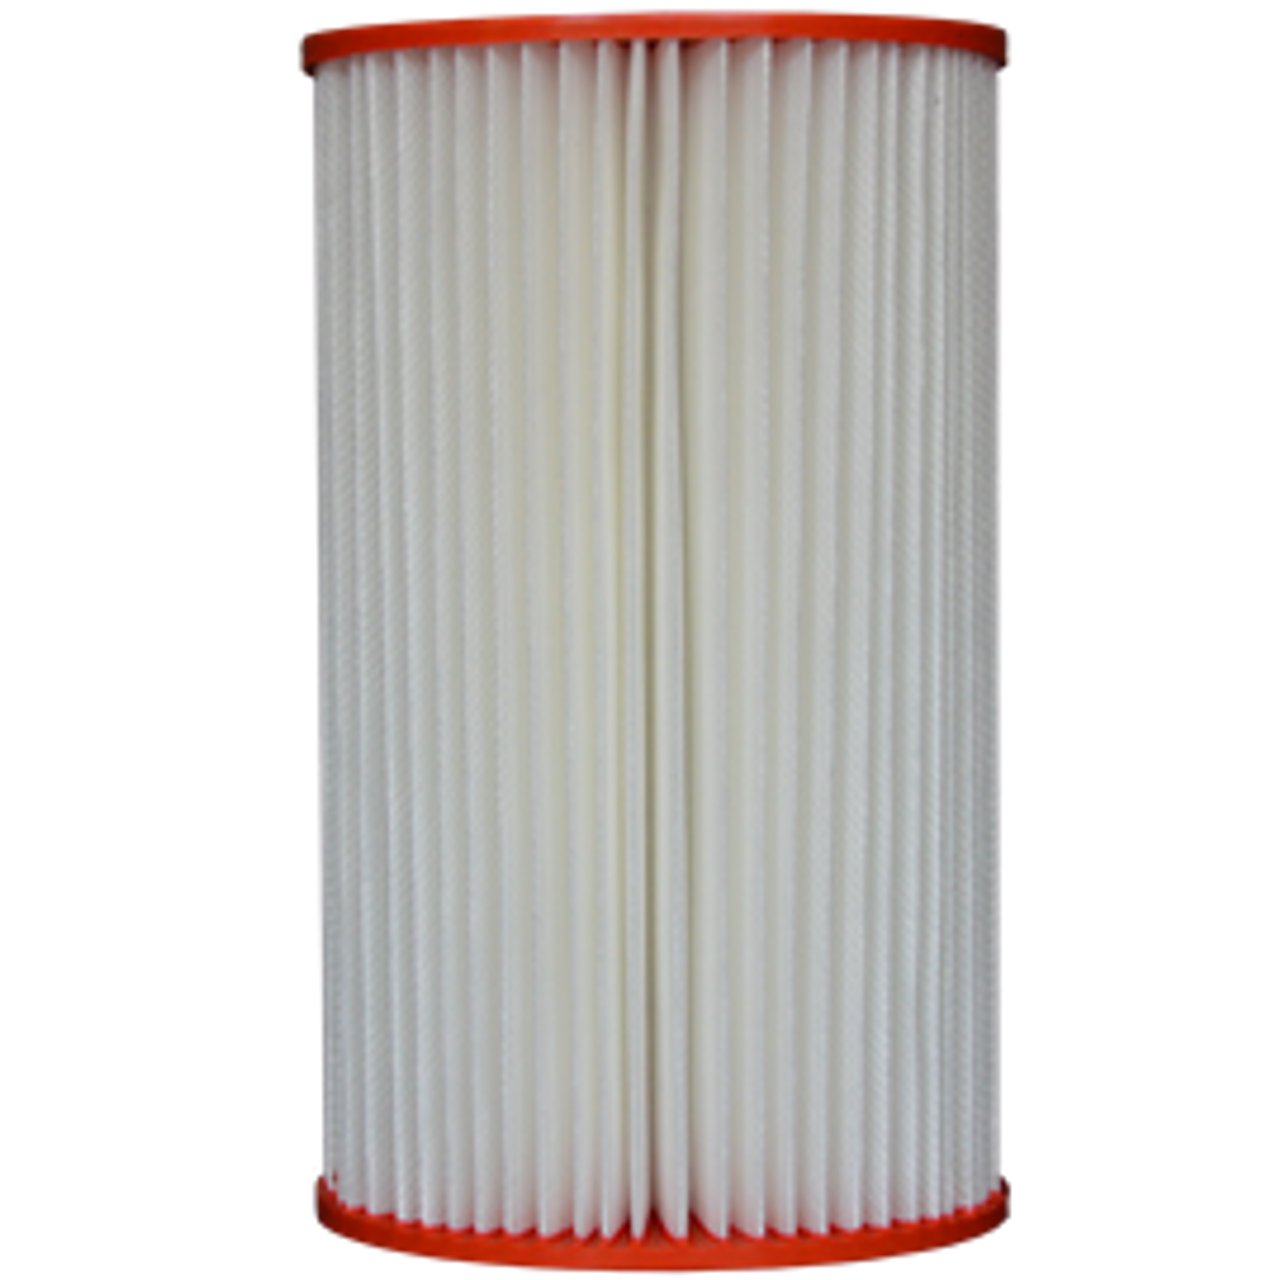 Pleatco PGF7 Cartridge Filter Replaces C-4307, FC-3744 and 40071